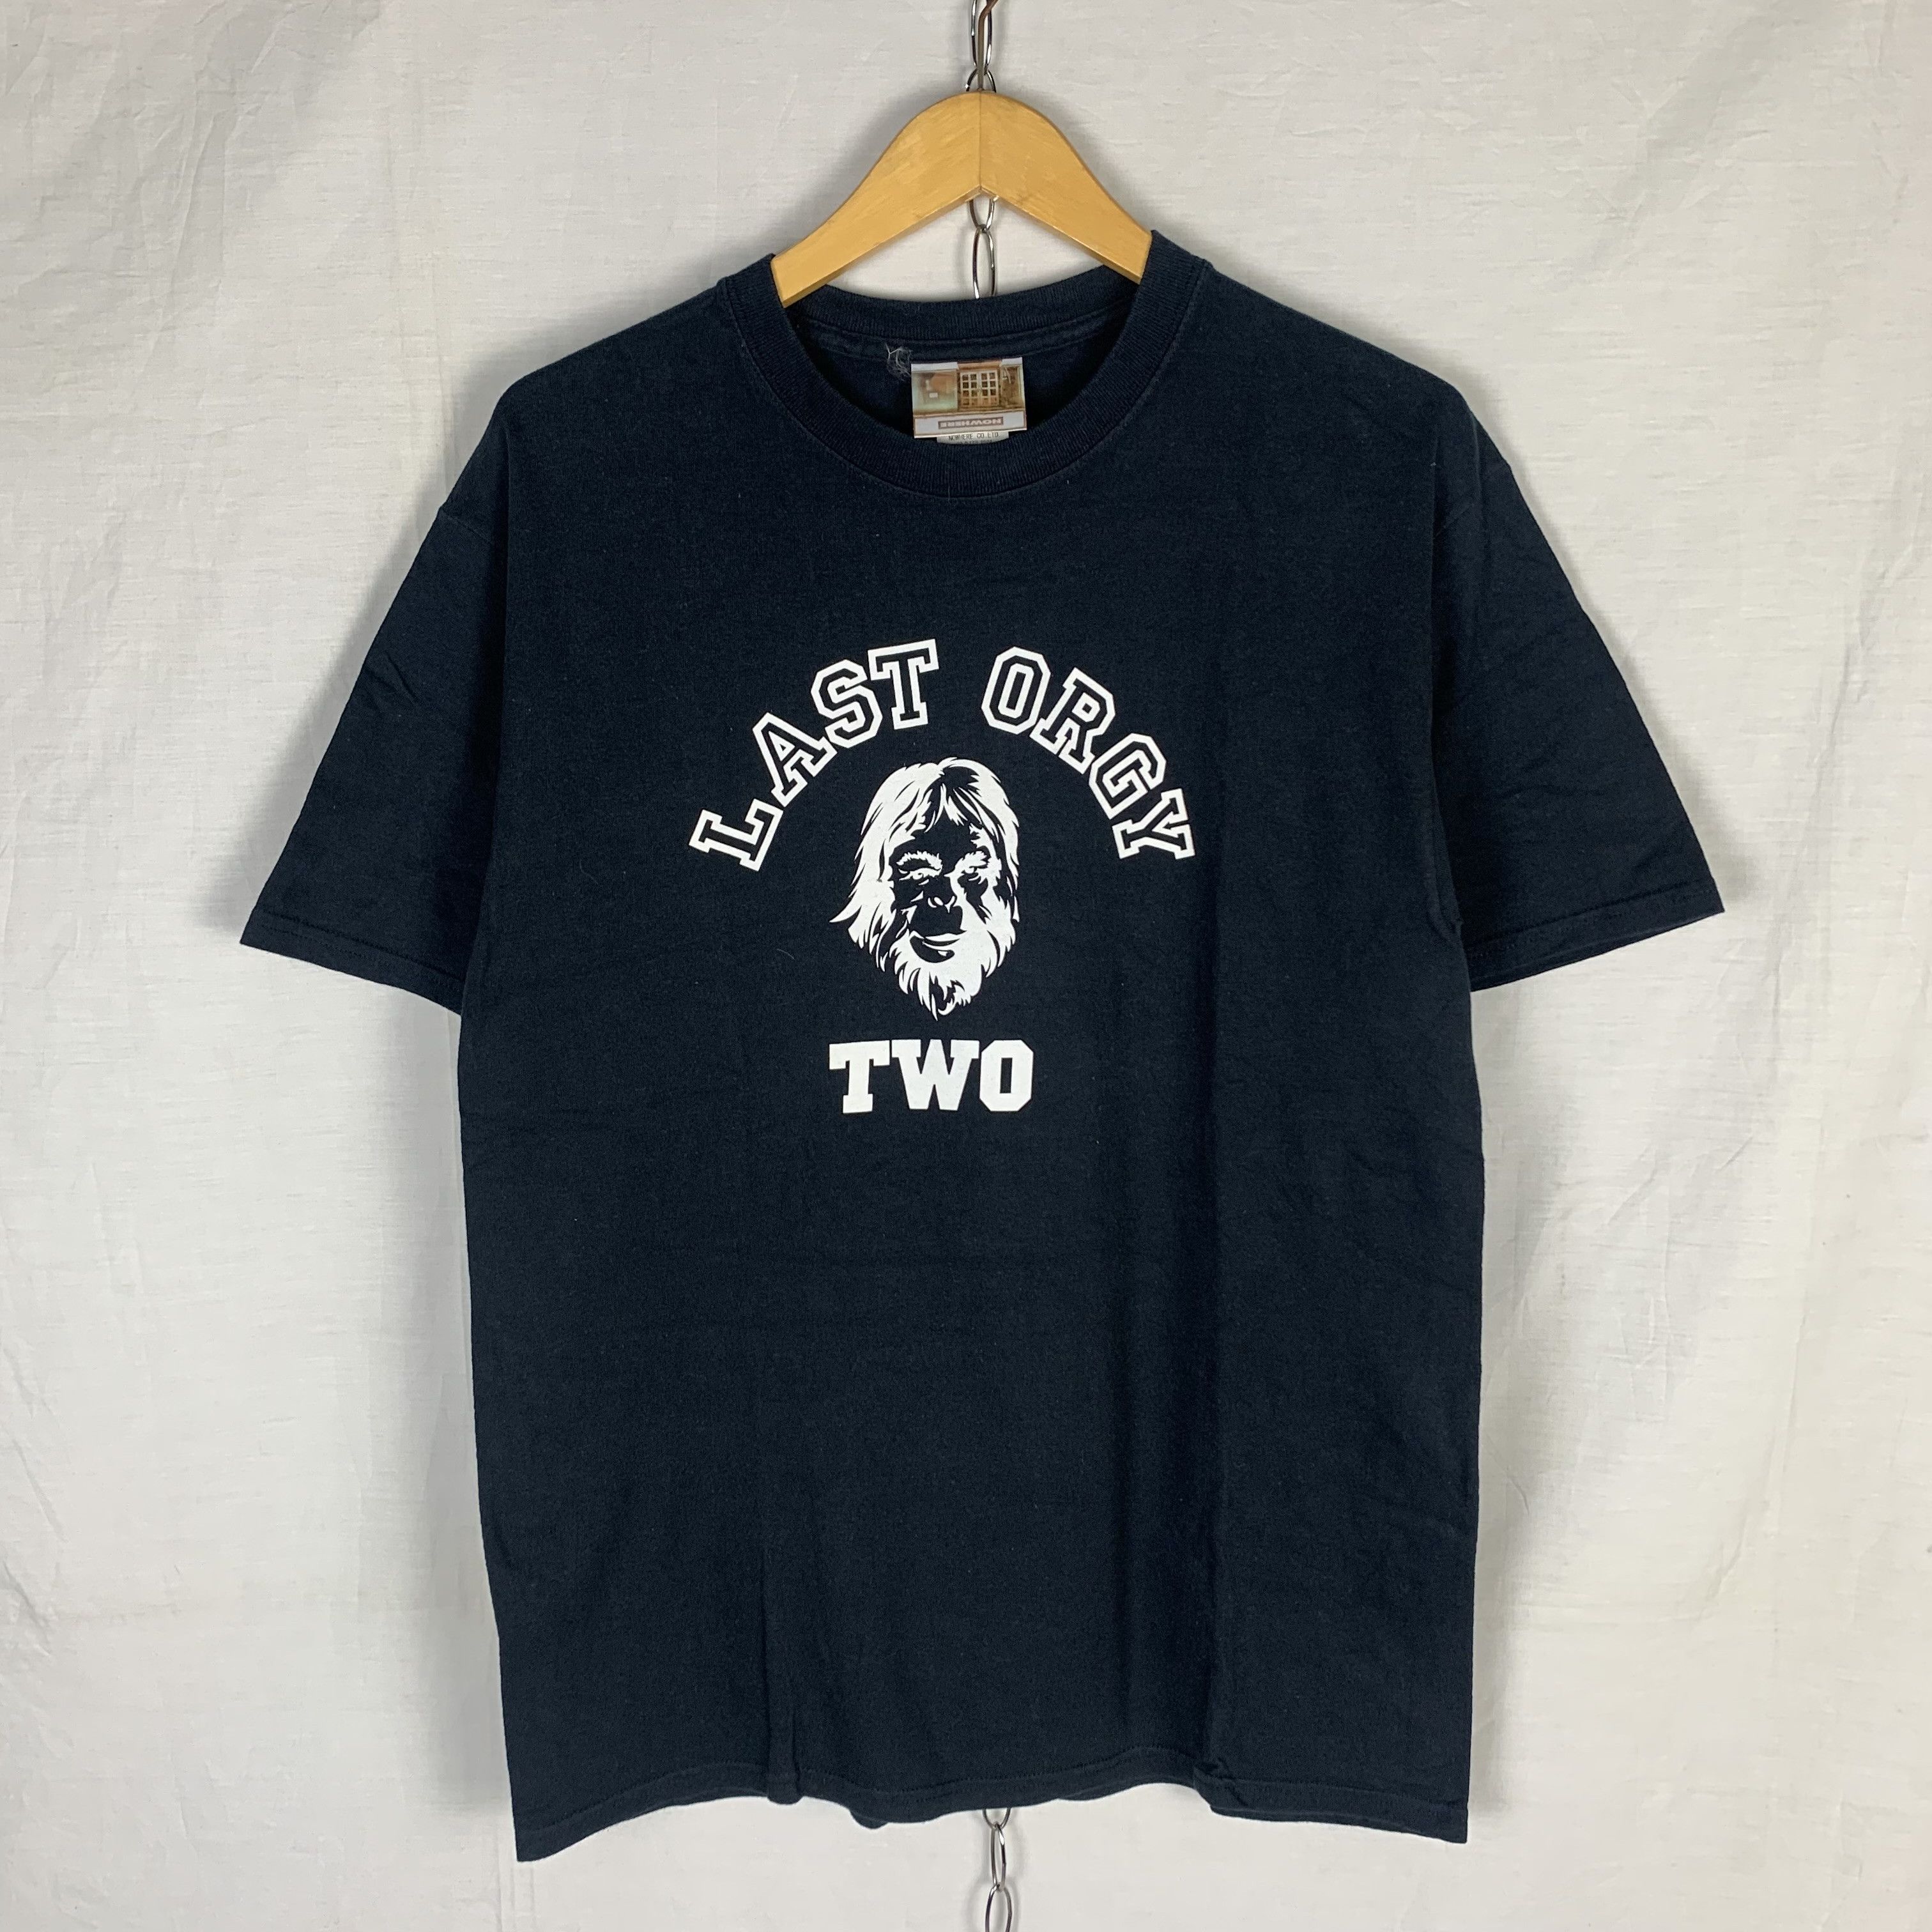 Bape Undercover Last Orgy Two Tee | Grailed